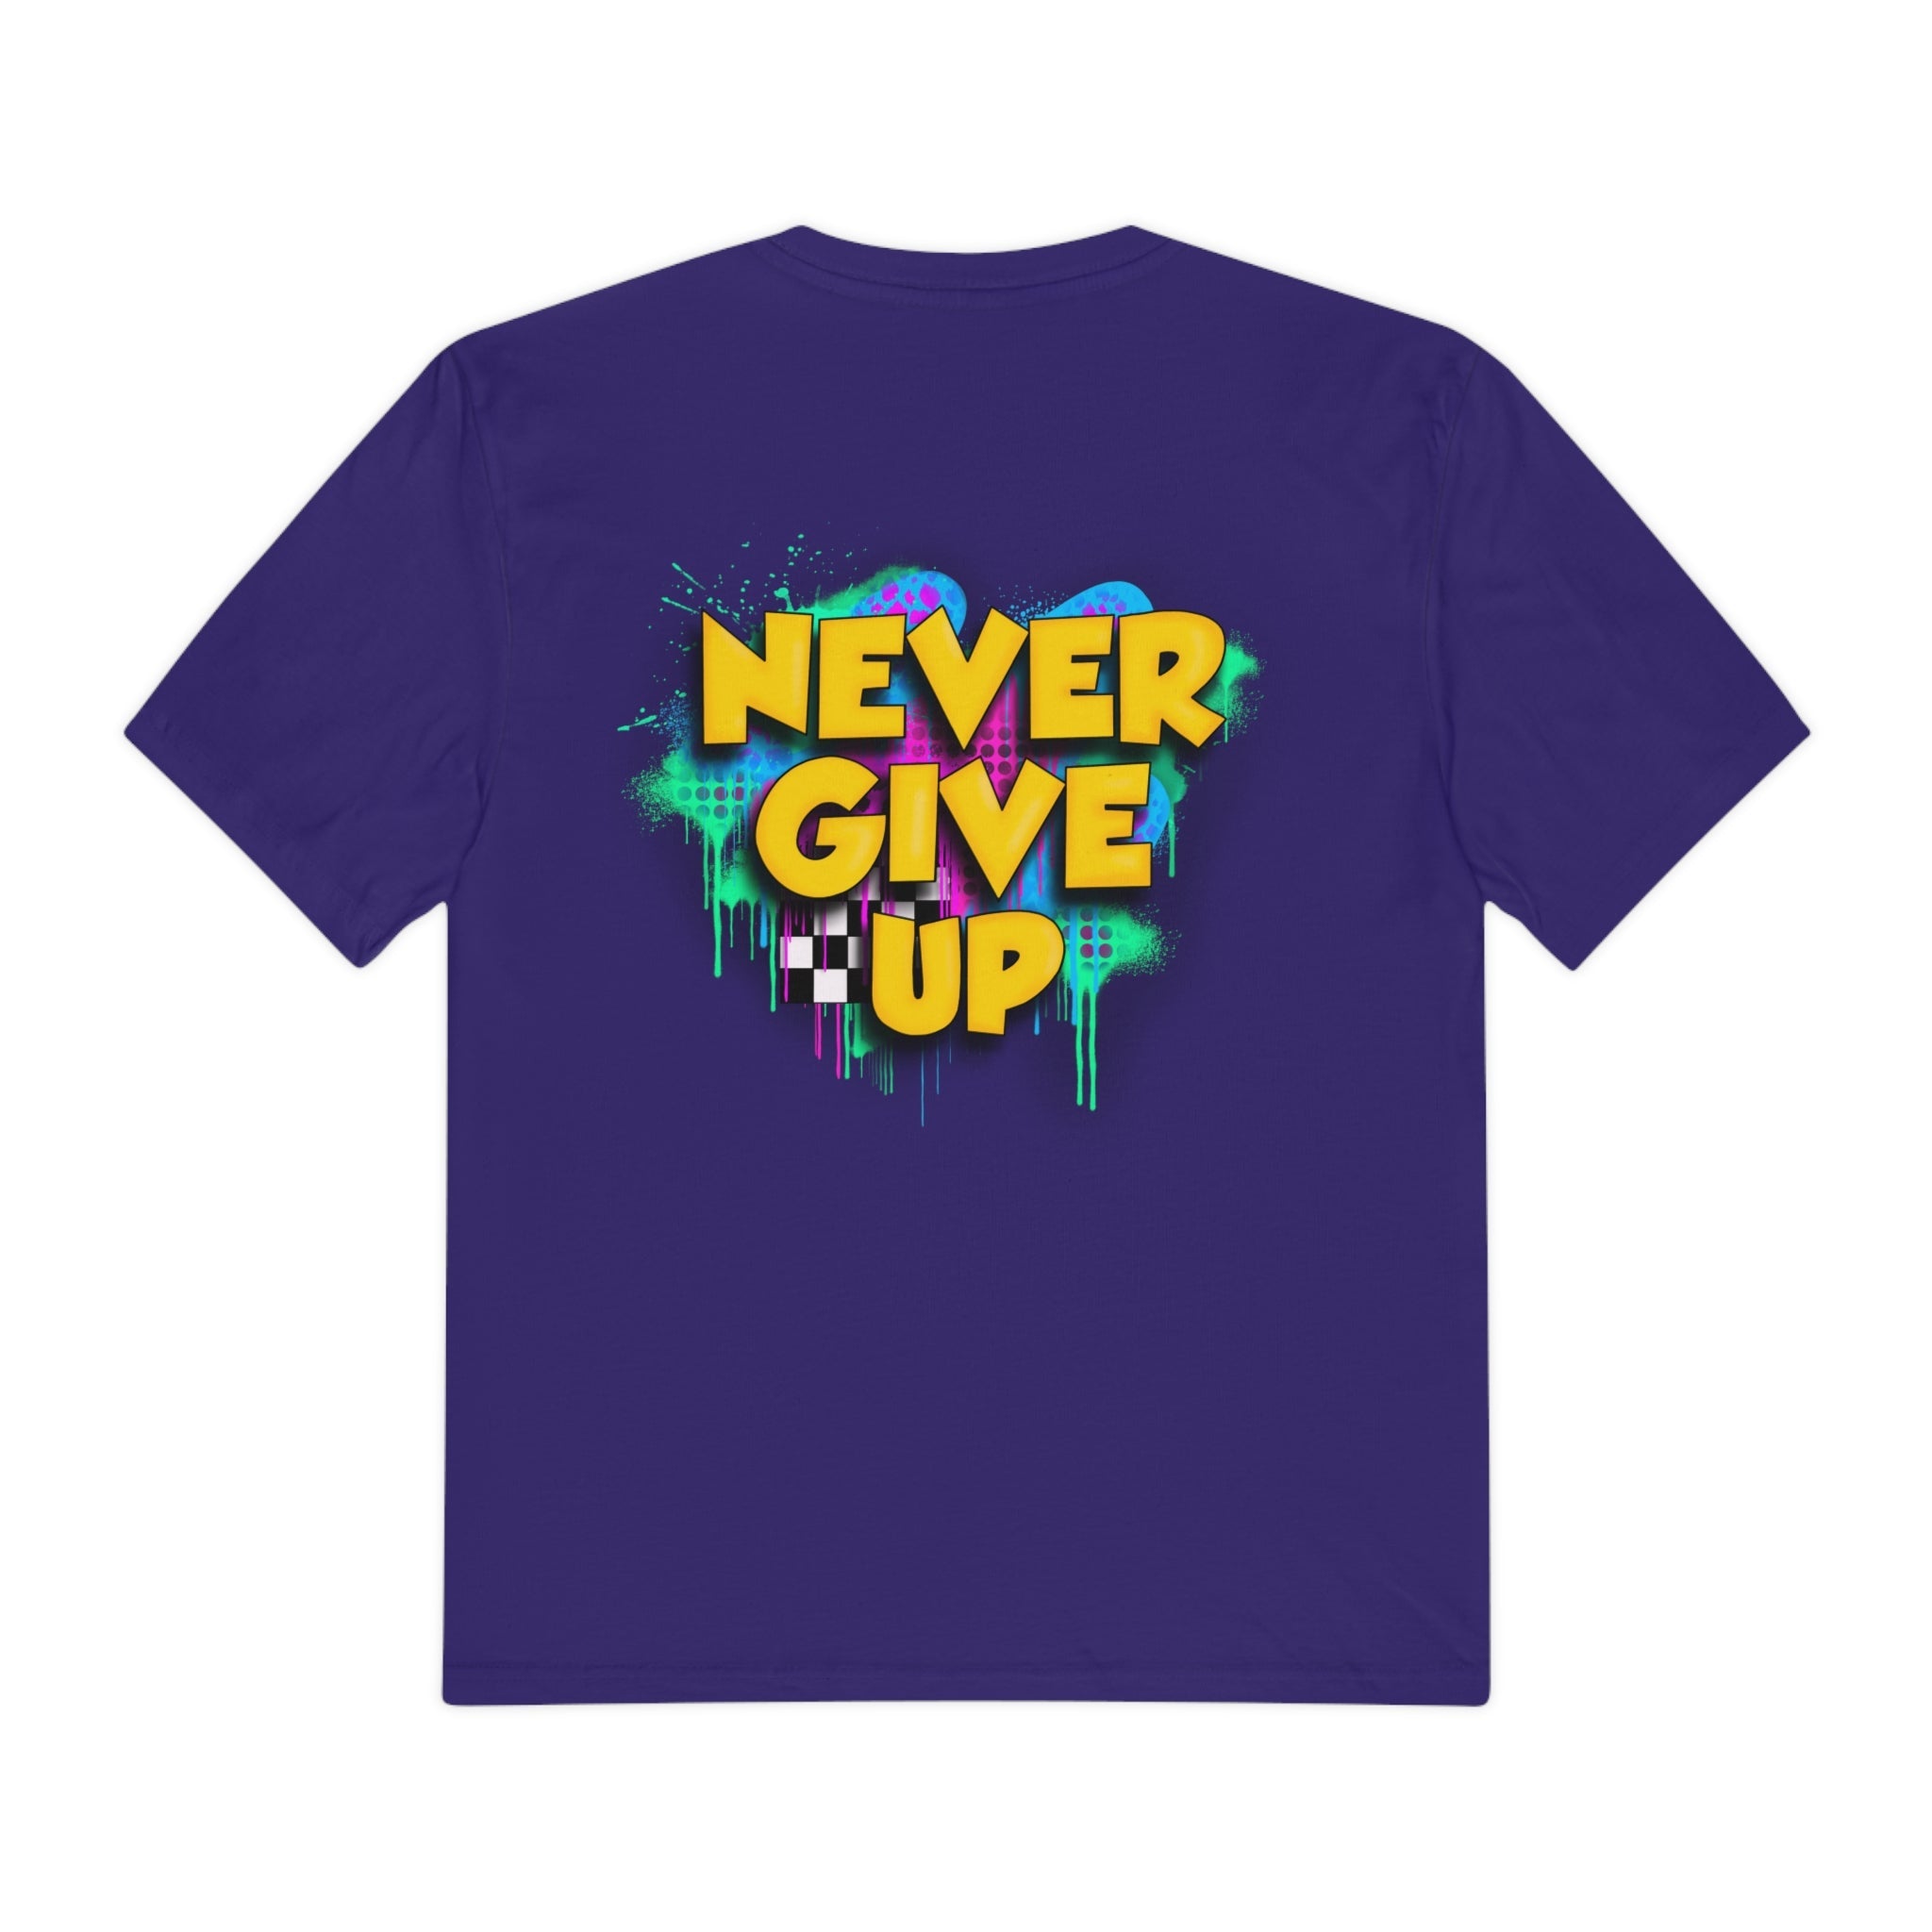 NEVER GIVE UP SK T - Sean Keith Art